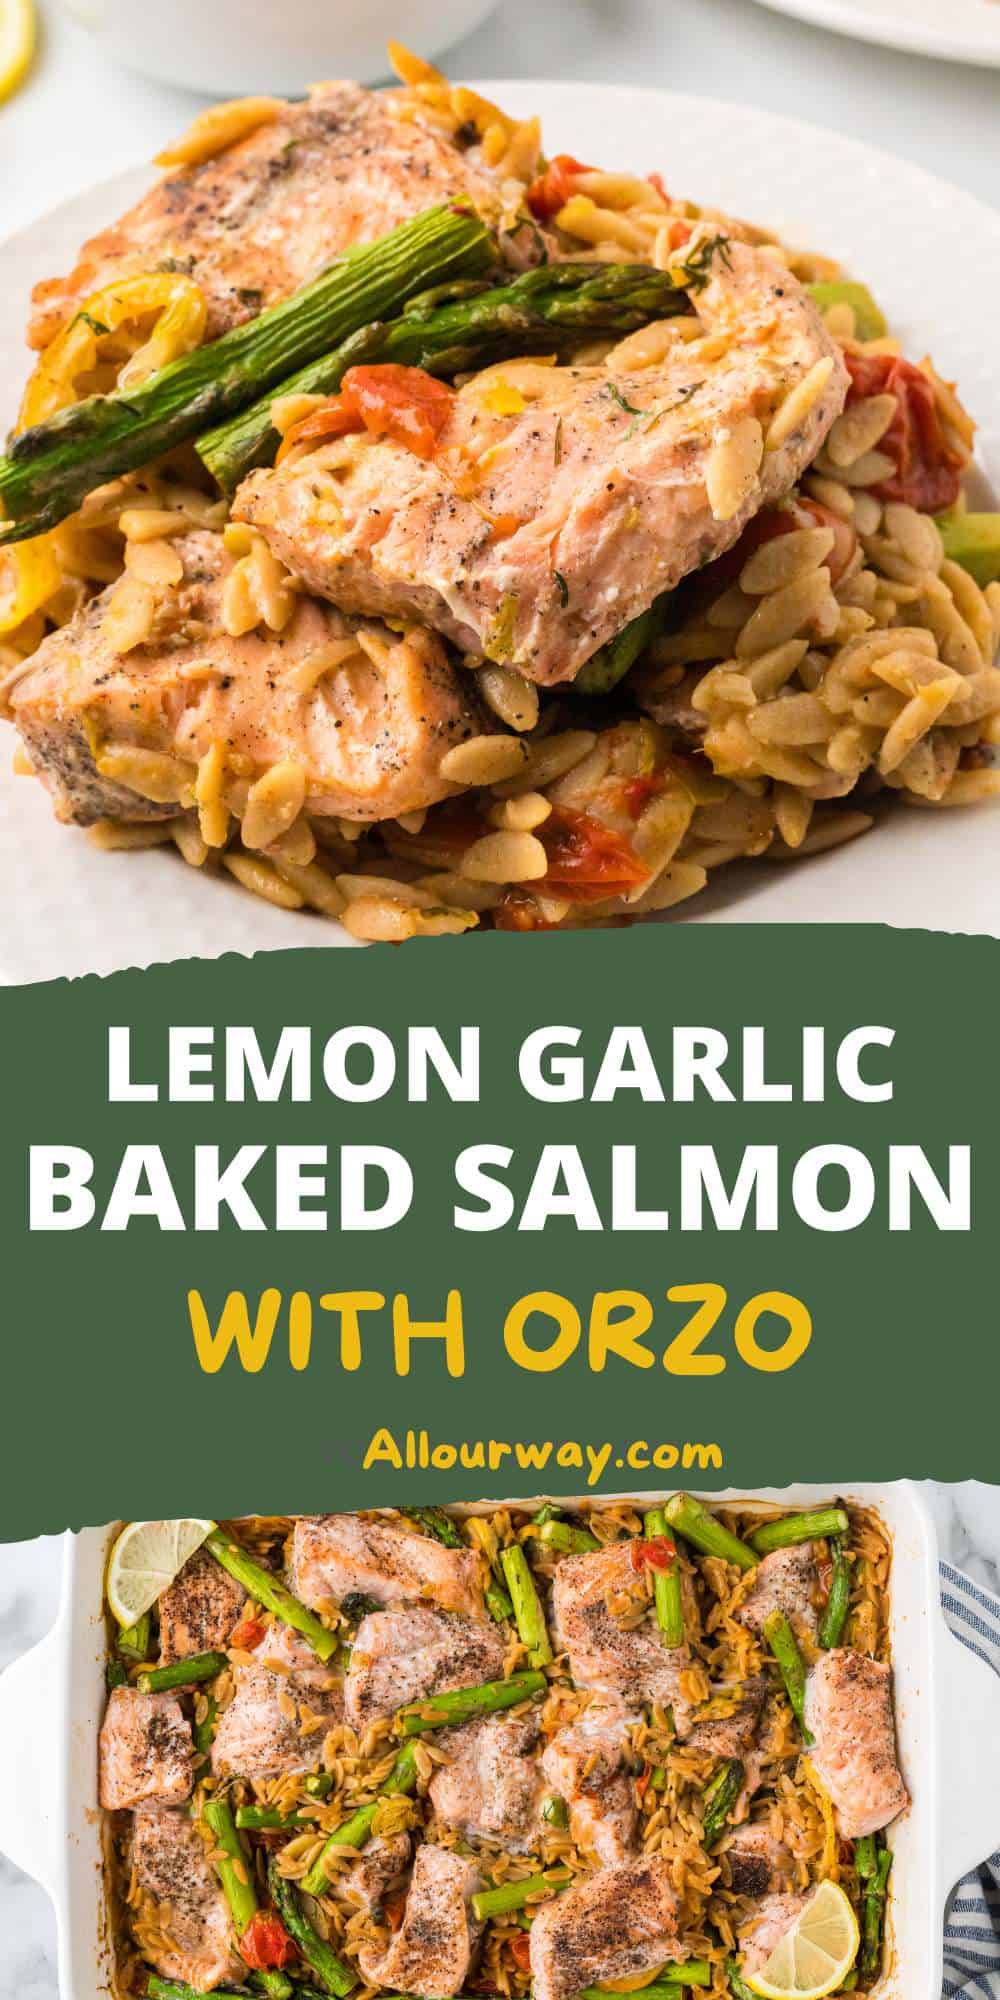 This Oven-Baked Salmon Recipe features tender and flaky salmon seasoned with zesty lemon and aromatic garlic, perfectly baked to juicy perfection. The salmon is paired with savory orzo pasta tossed in a flavorful herb dressing and a medley of crisp spring vegetables for a dish that screams freshness and flavor.